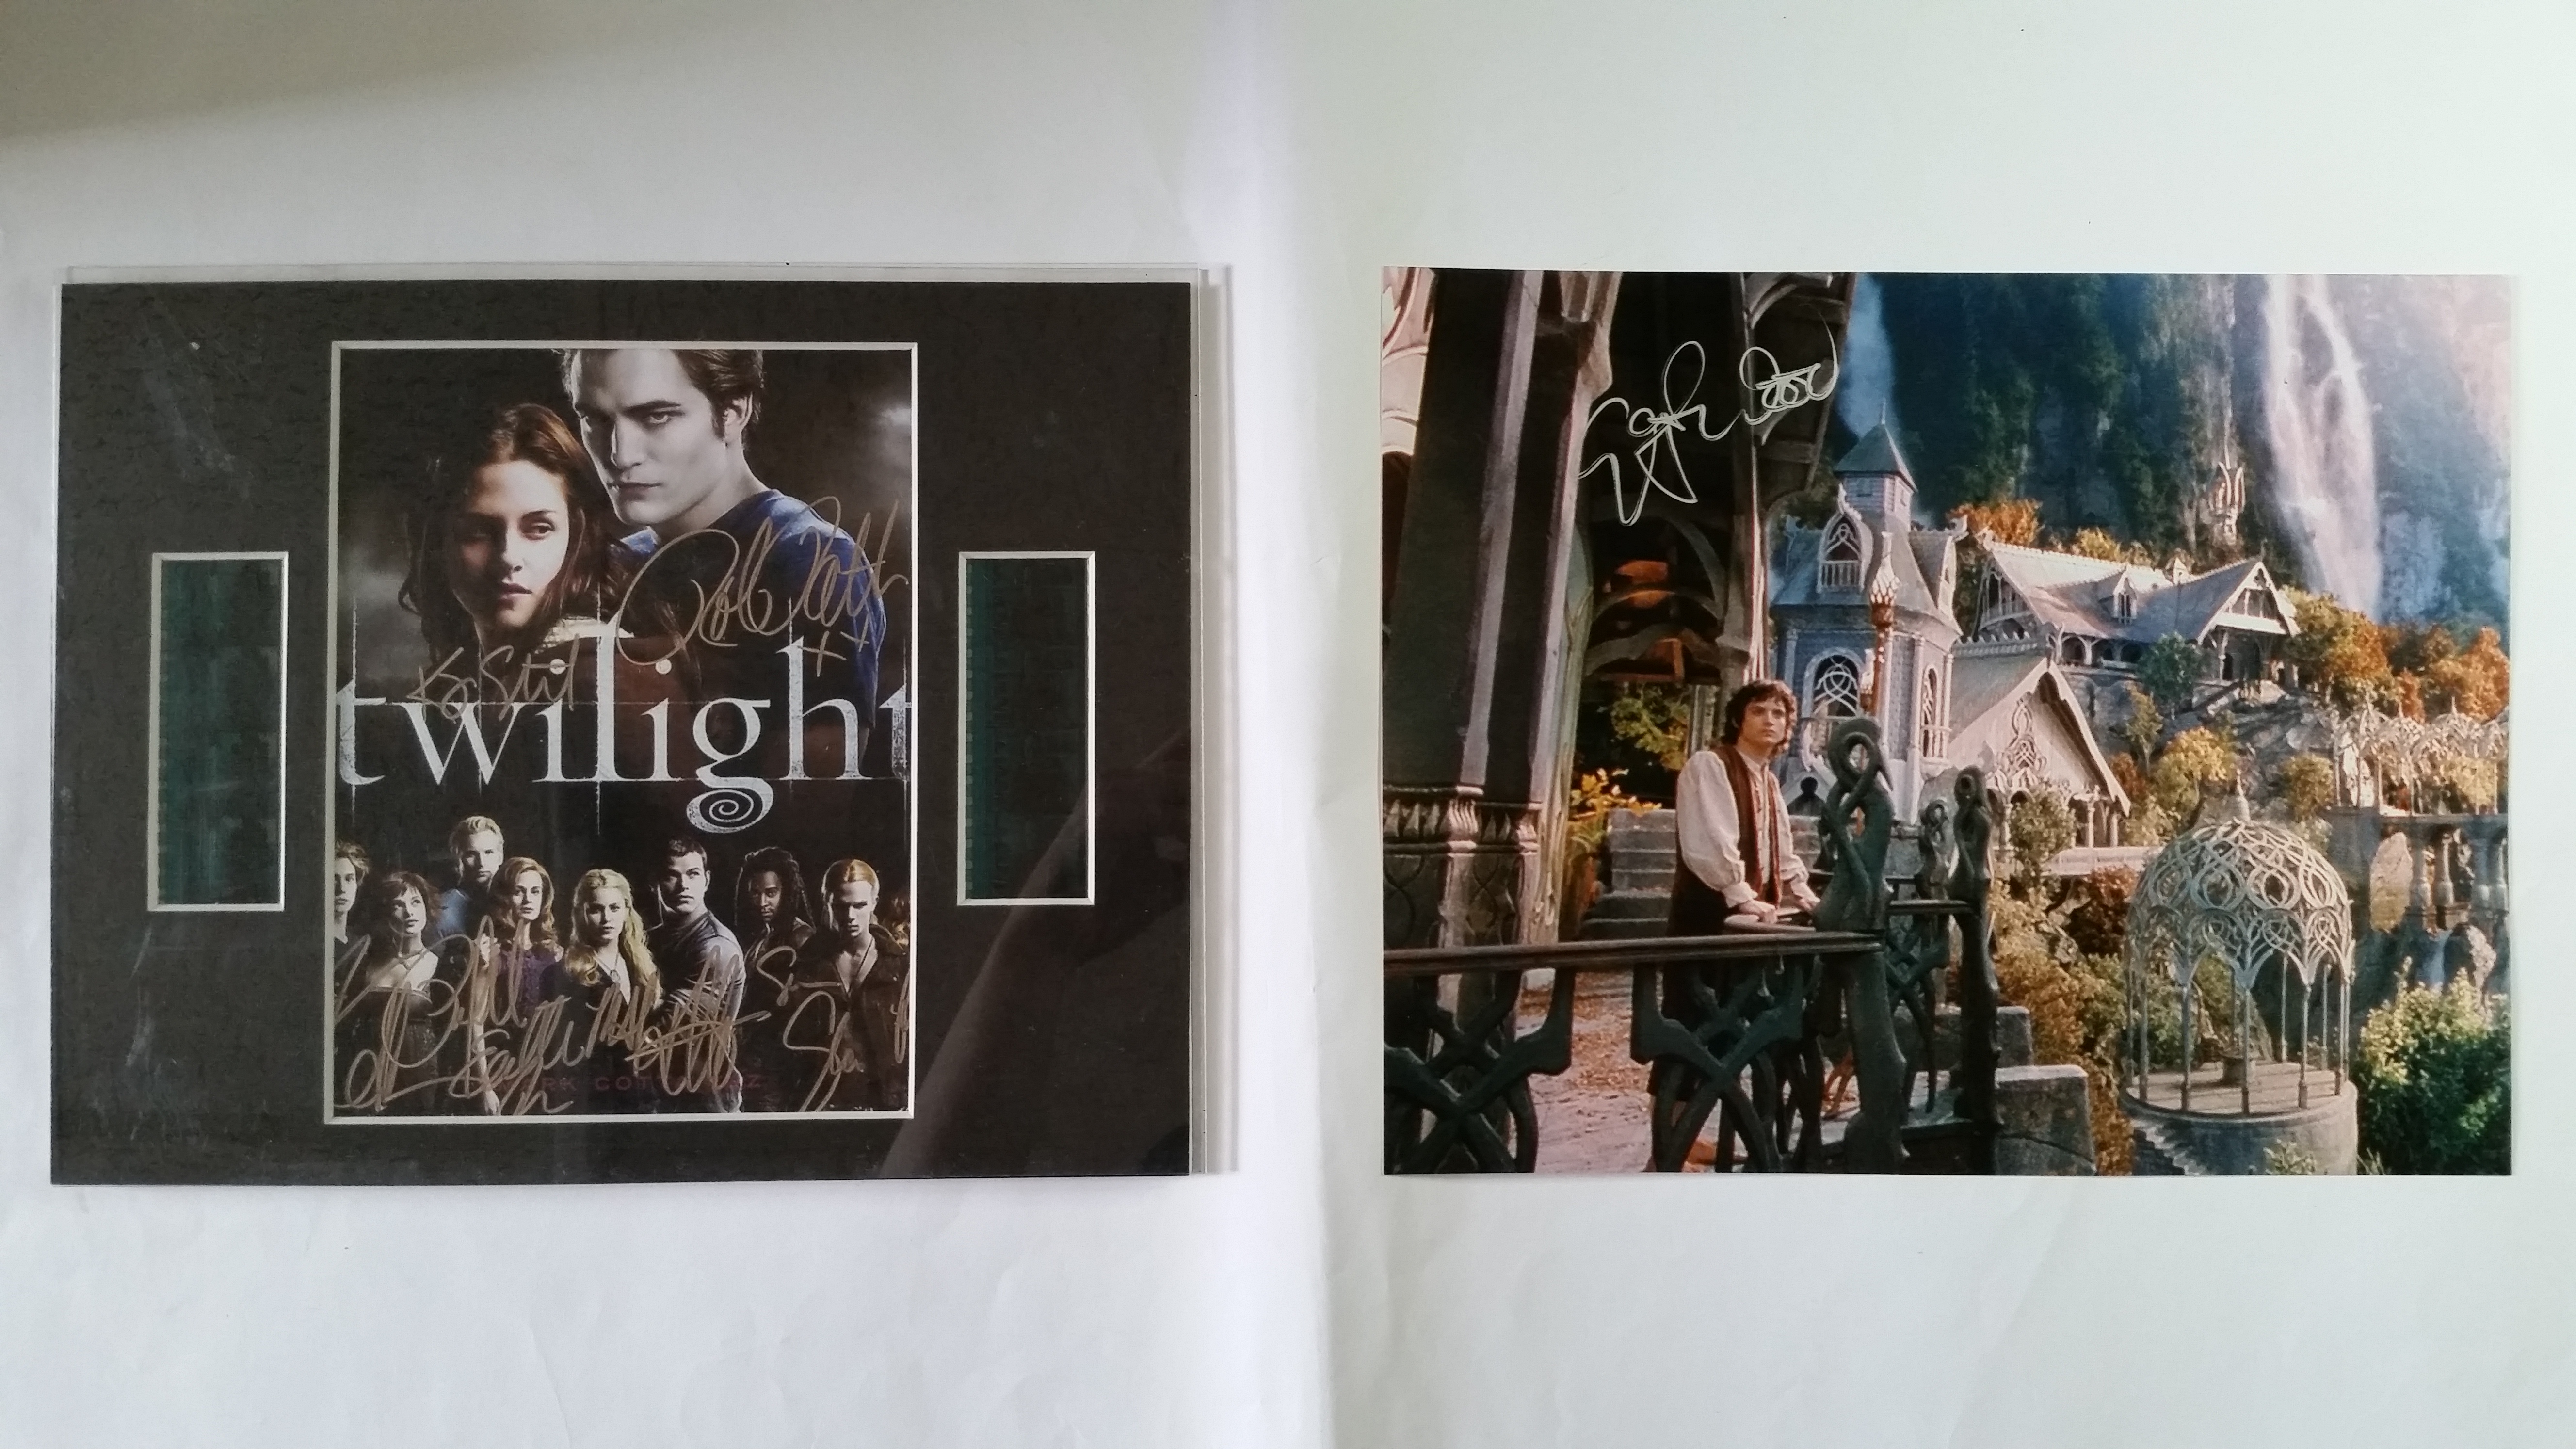 CINEMA, inc. signed photo by Elijah Wood, showing him in a scene from Lord of the Rings, colour,